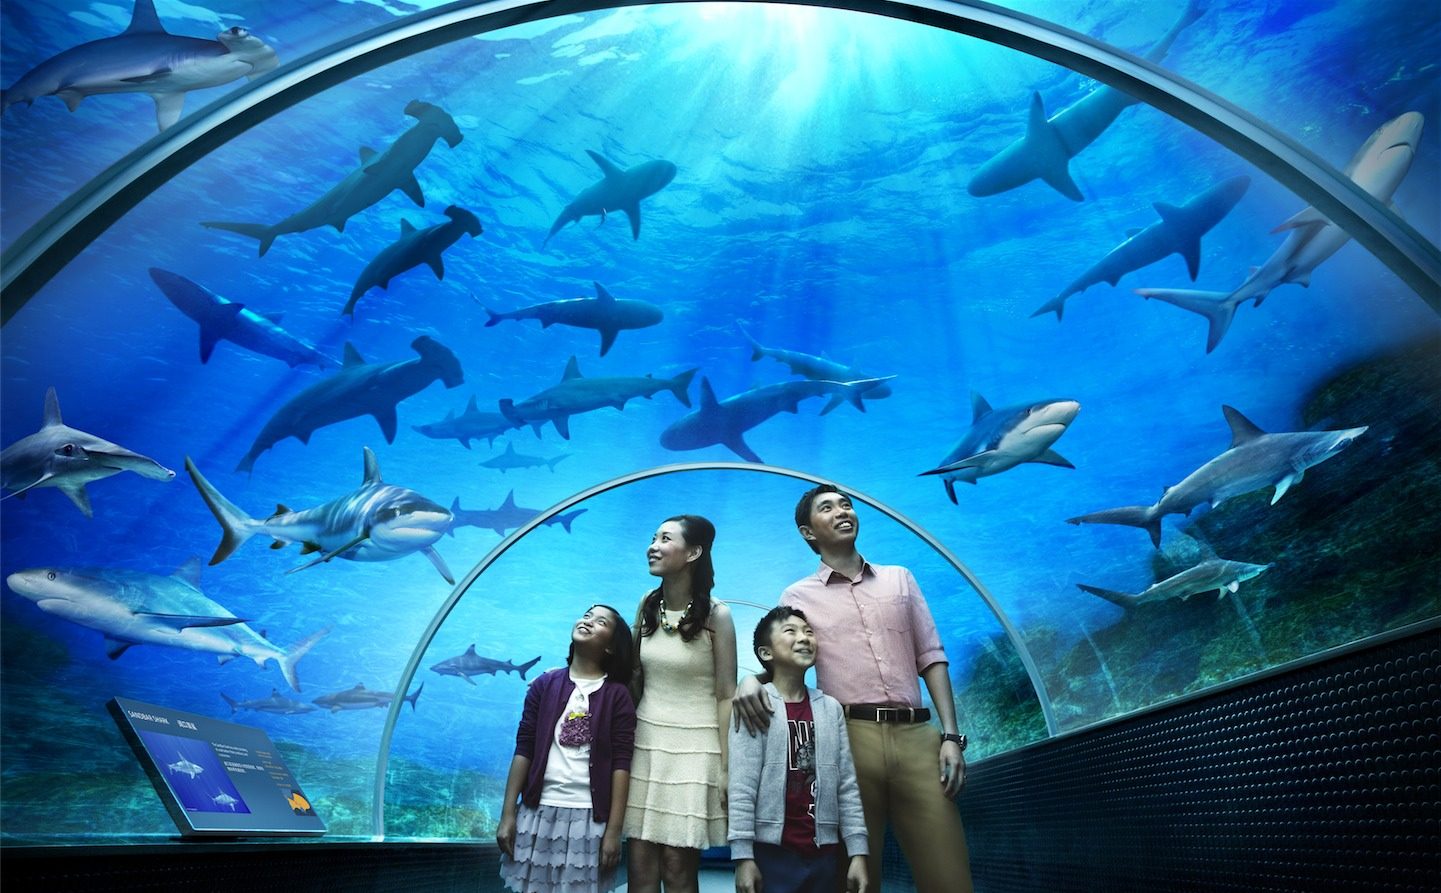 Things to do in Langkawi during New Year View sea creatures at Underwater World Langkawi